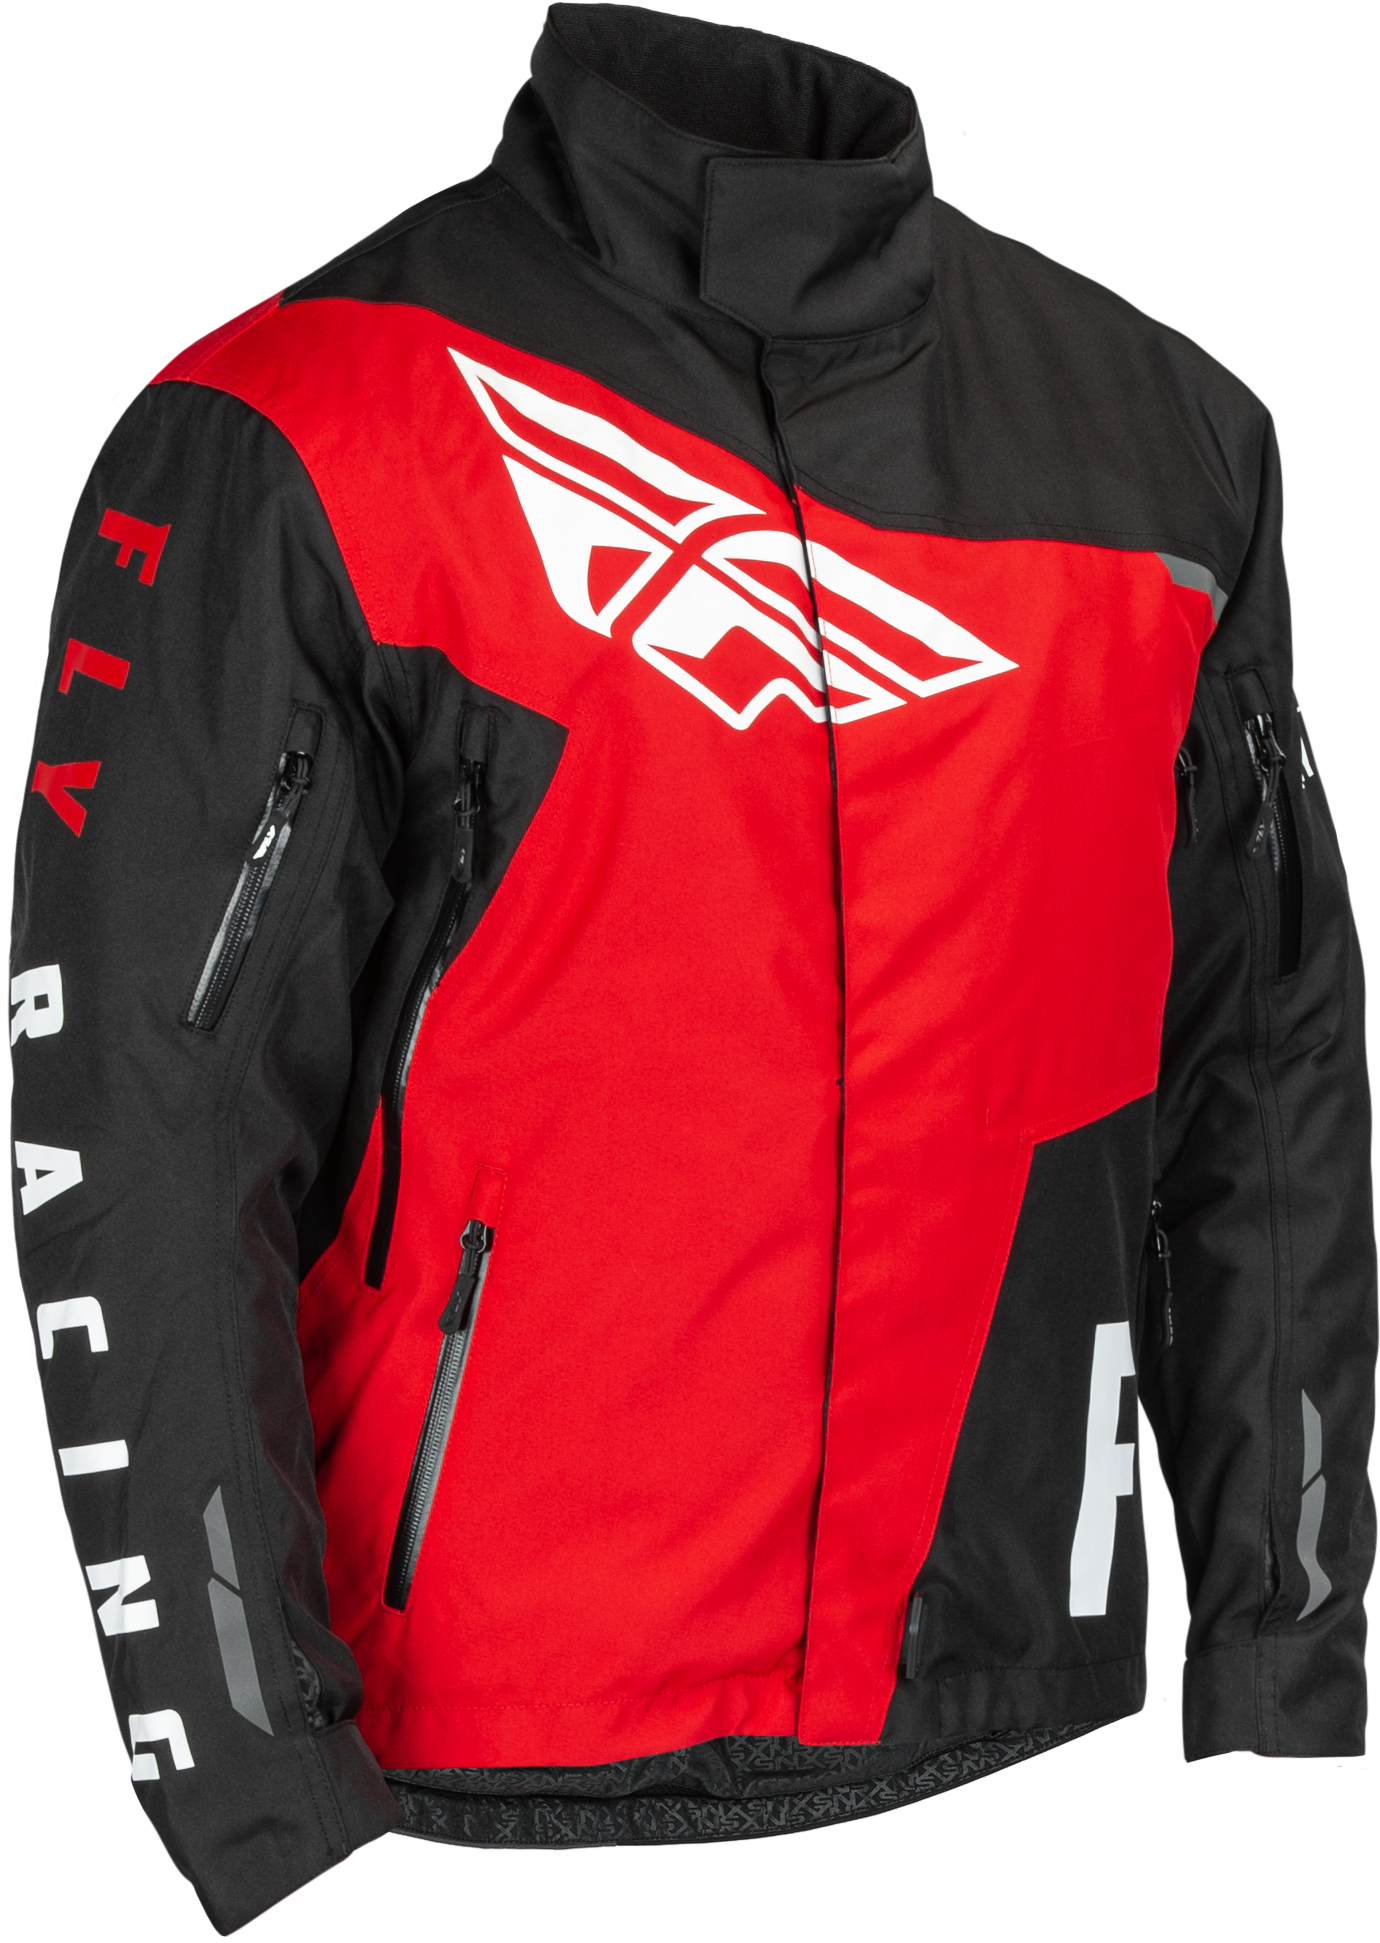 FLY RACING Youth Snx Pro Jacket Black/Red Yl 470-5402YL